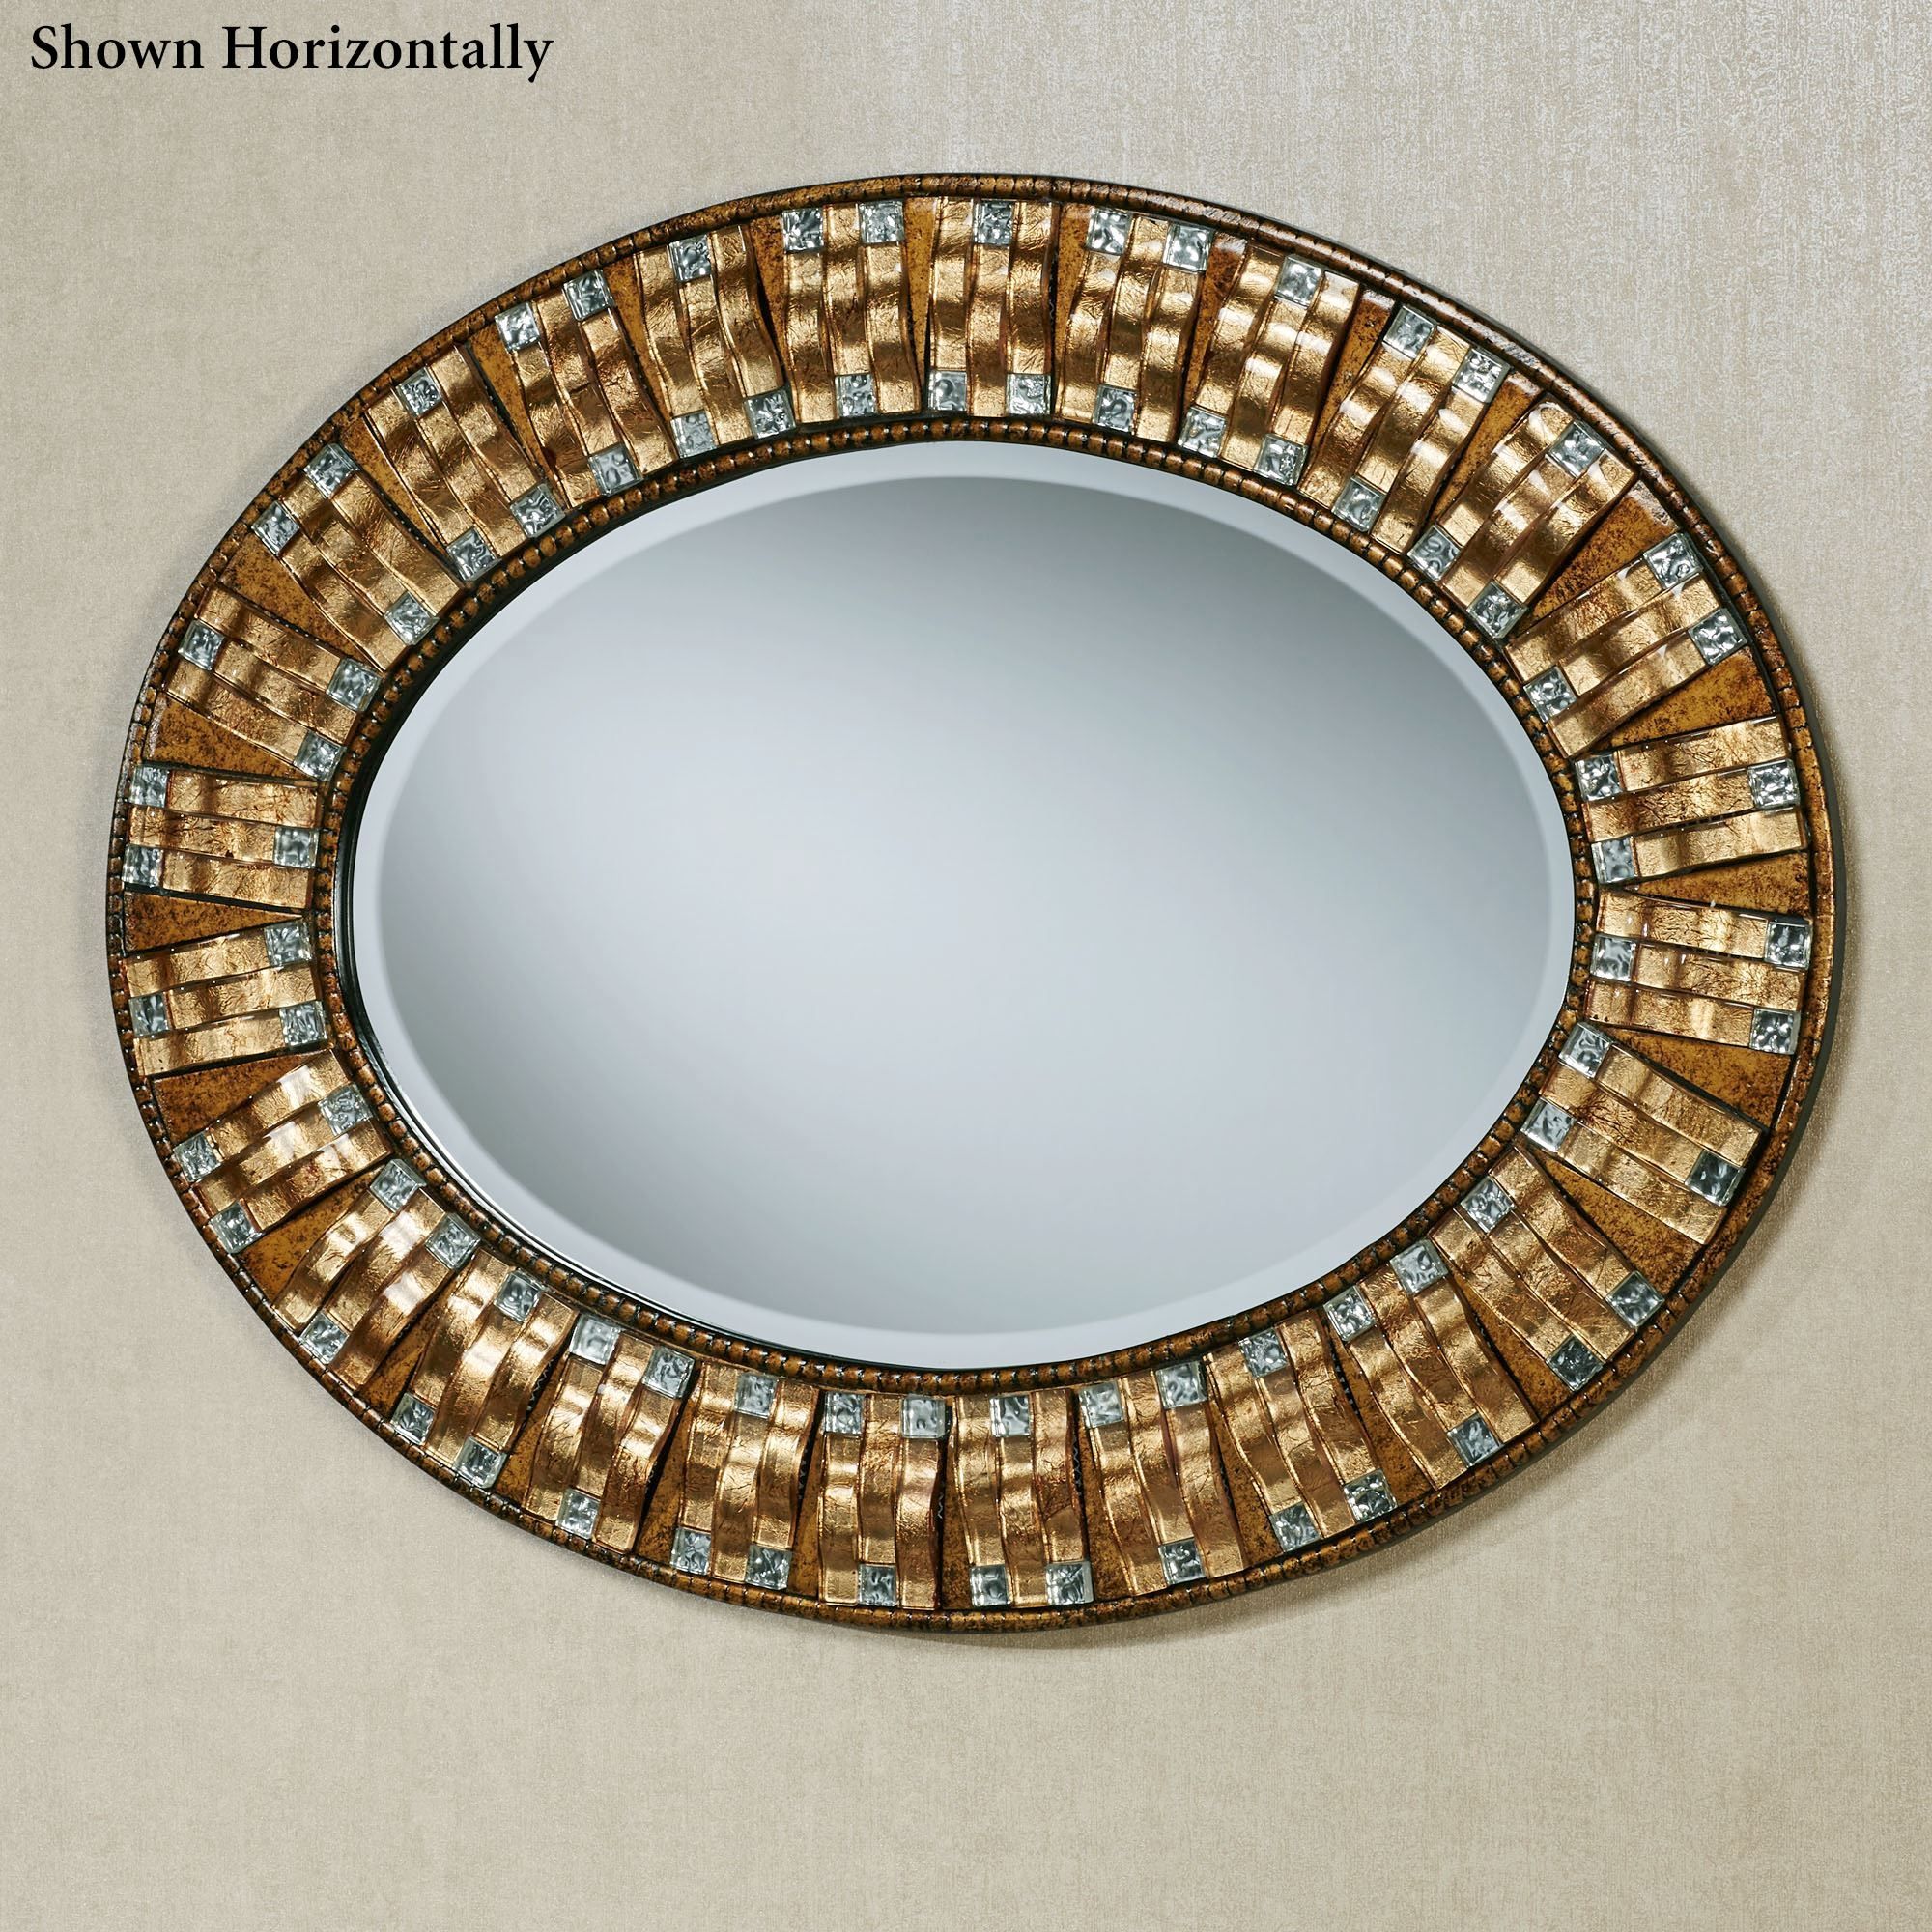 Maybelle Mosaic Oval Wall Mirror With Regard To Mosaic Oval Wall Mirrors (View 6 of 15)